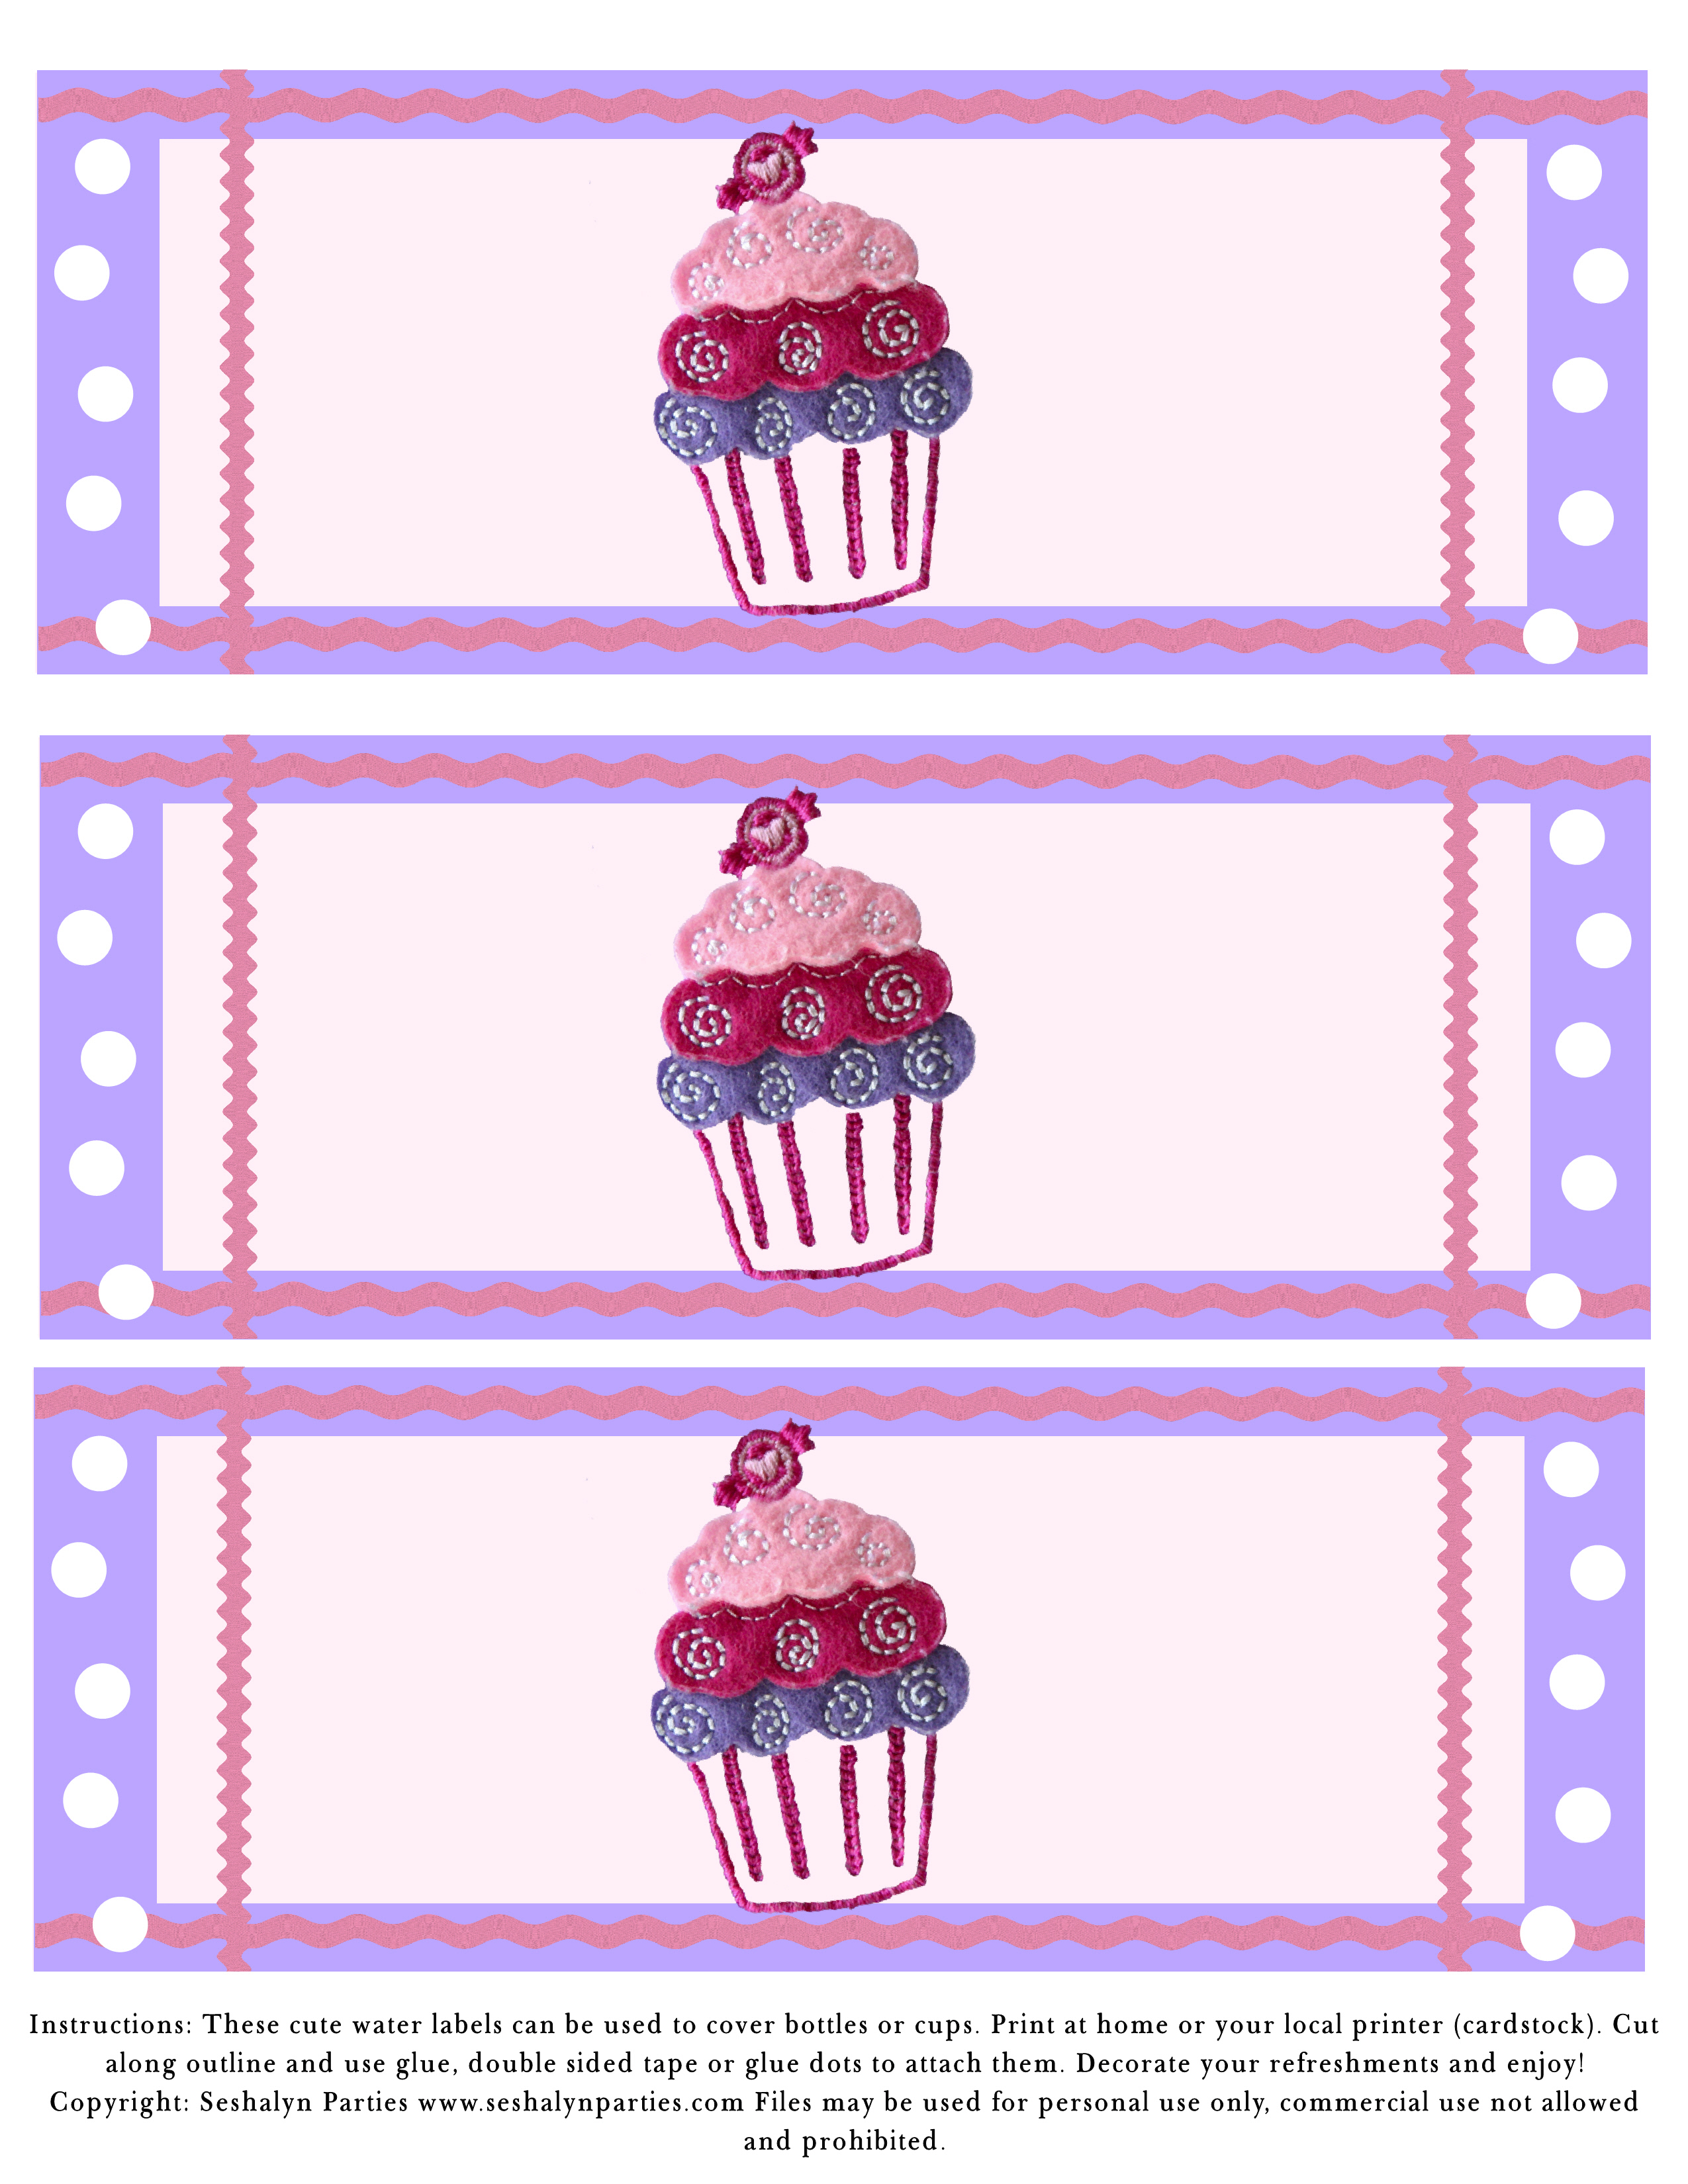 7-best-images-of-cupcake-party-printables-free-birthday-cupcake